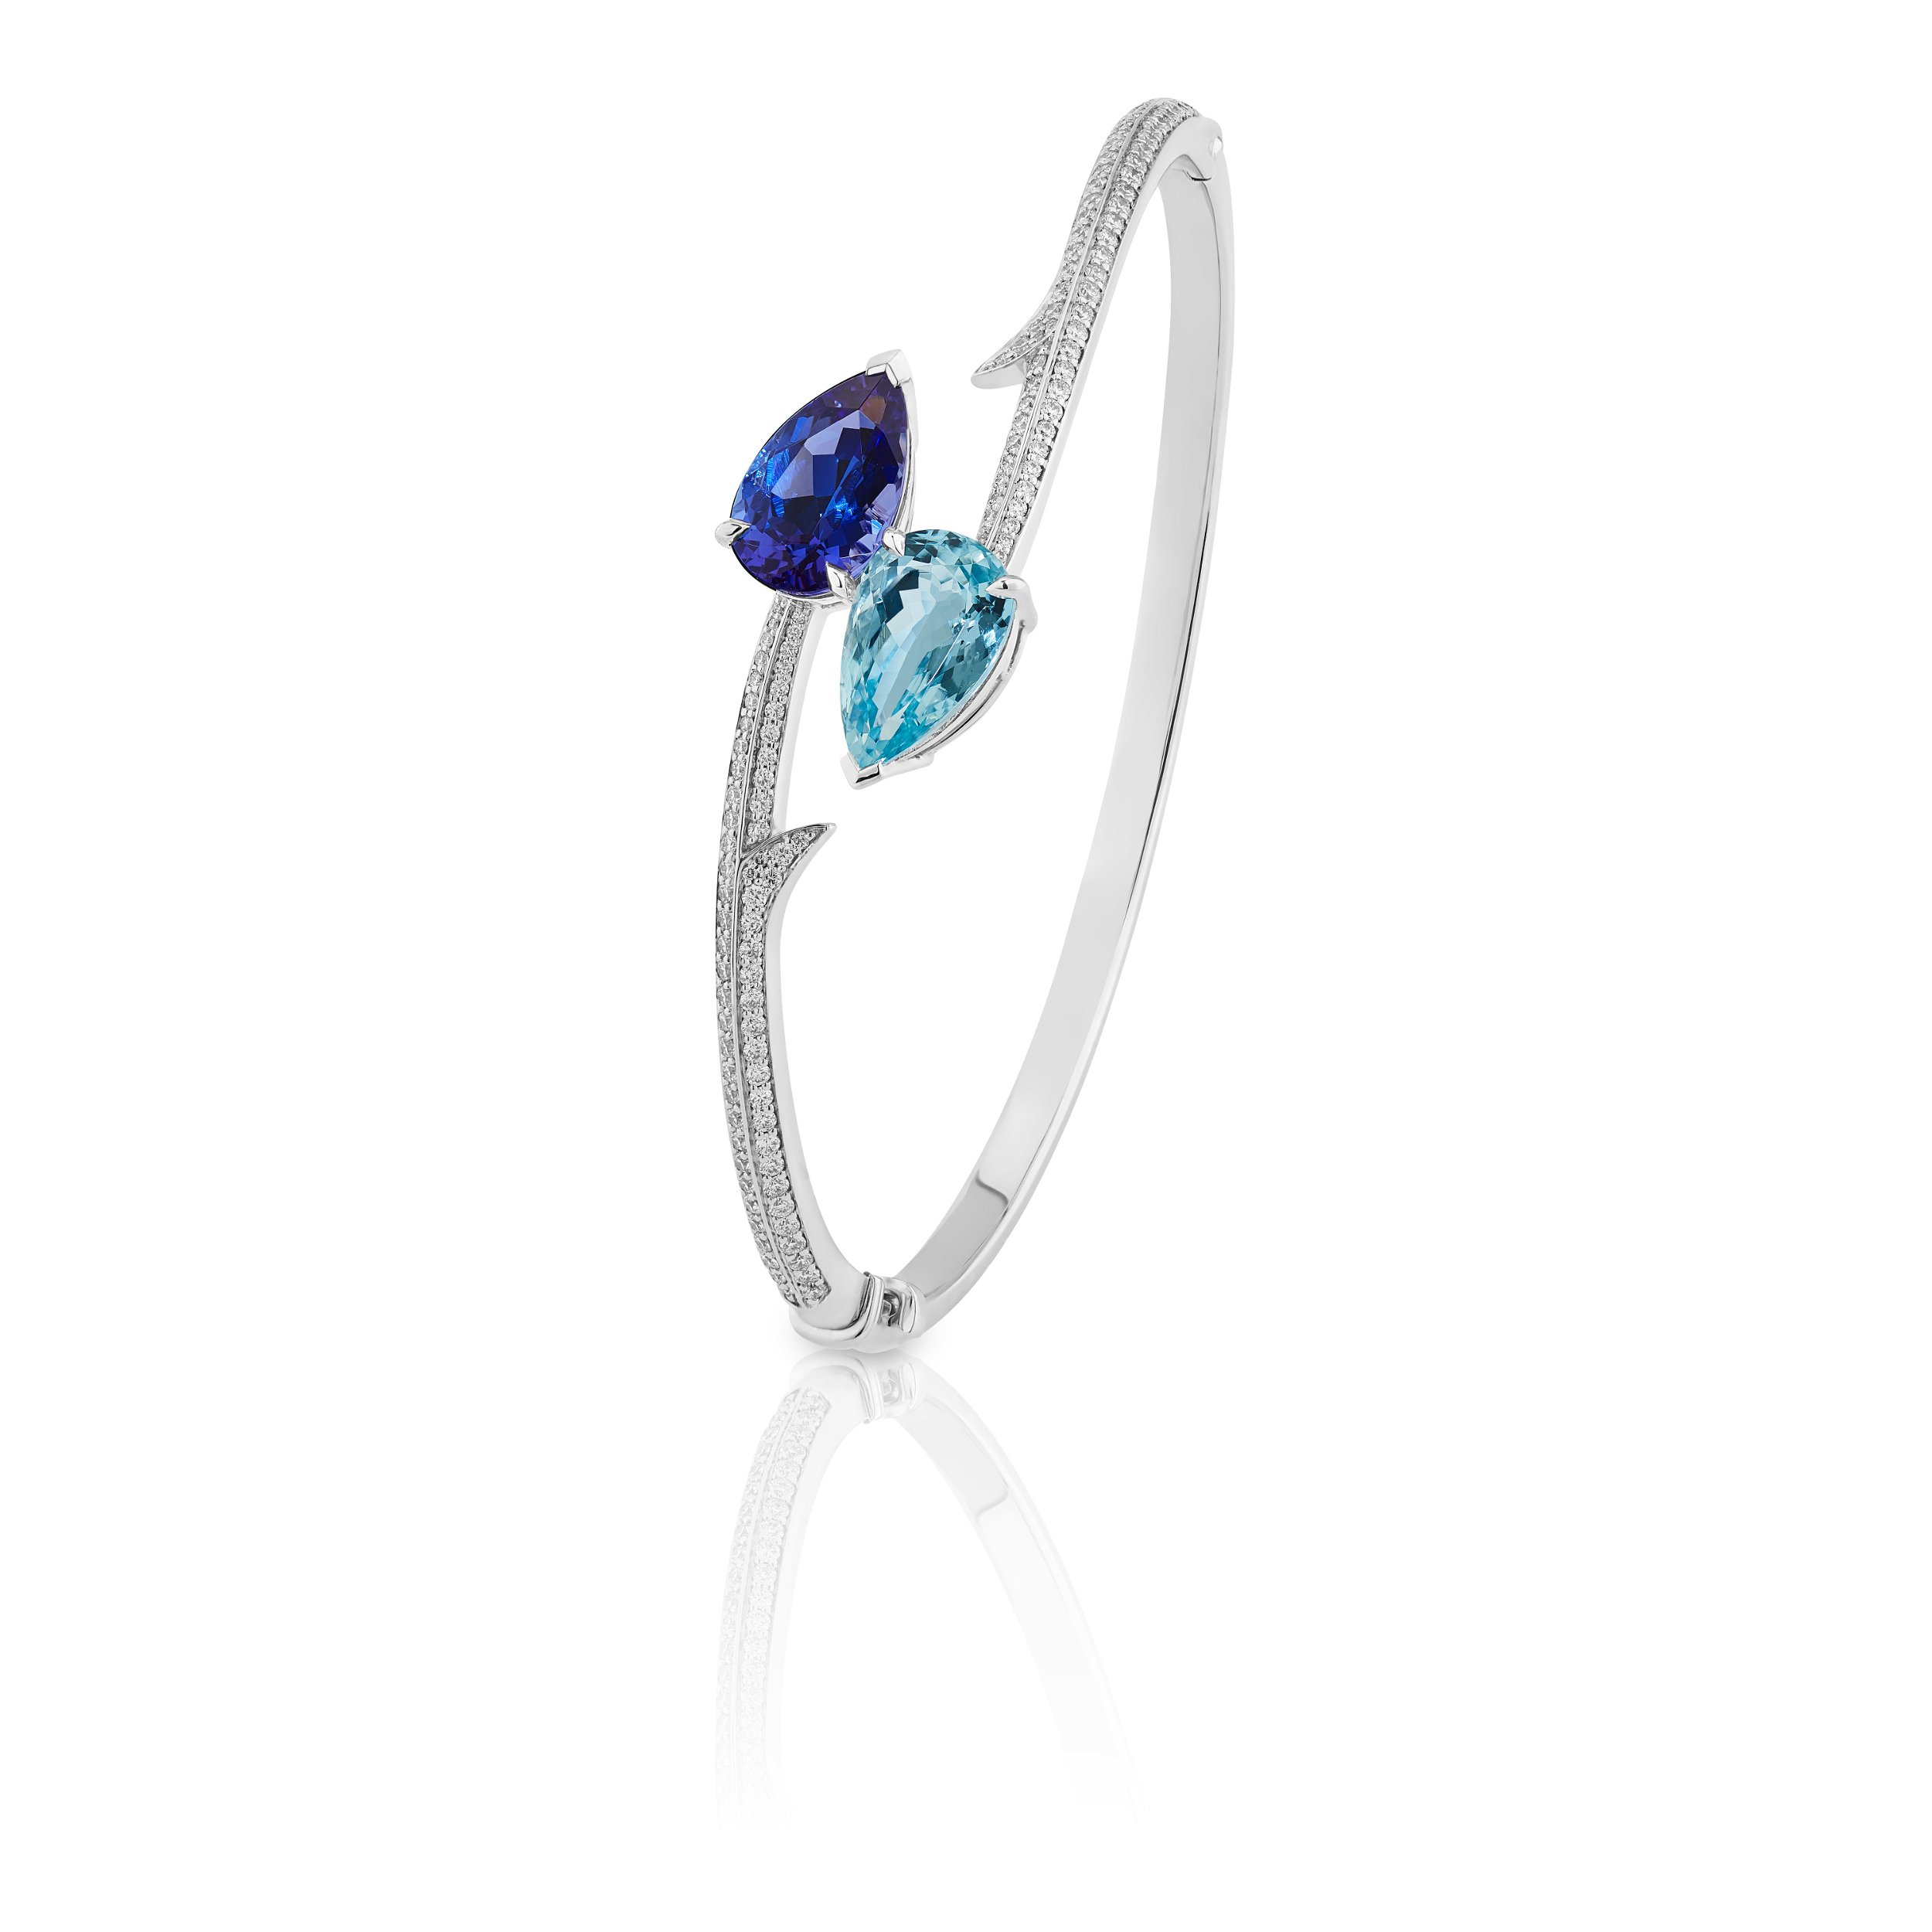 Buy Premium Ethiopian Welo Opal and Tanzanite Bangle Bracelet in Vermeil  Yellow Gold and Platinum Over Sterling Silver (7.25 In) 11.65 ctw at ShopLC.